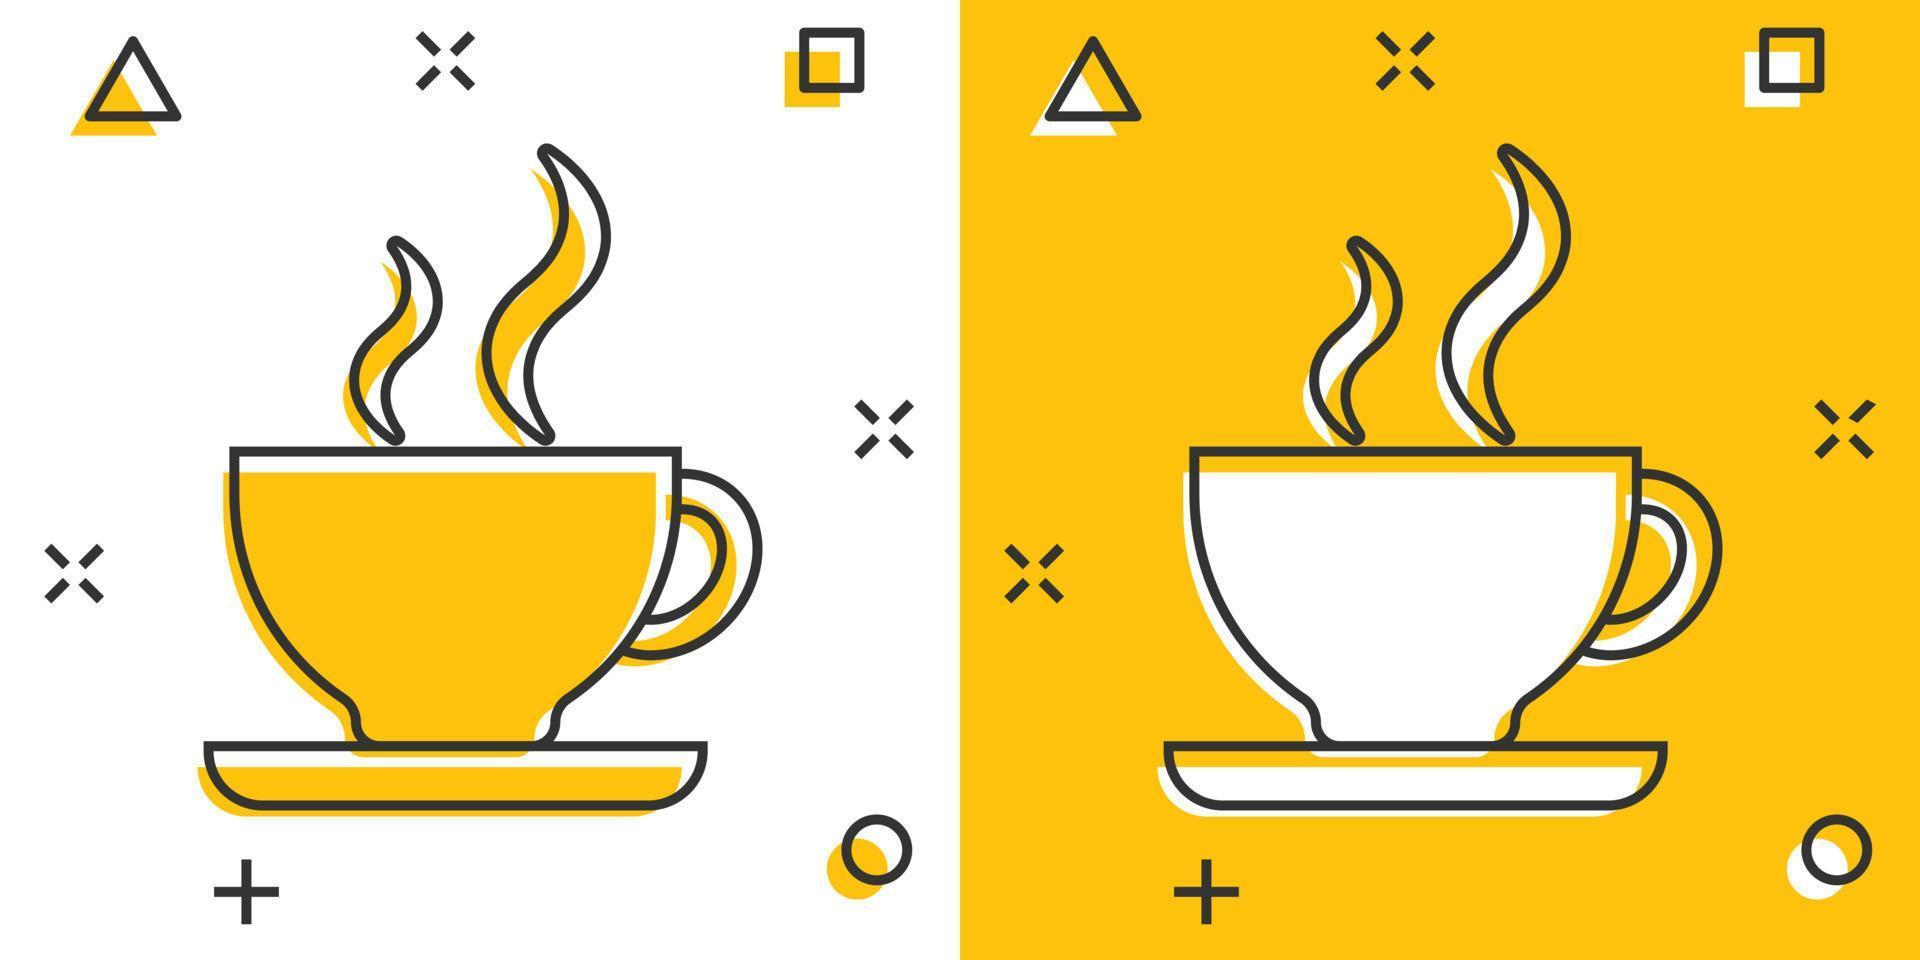 Vector cartoon coffee cup icon in comic style. Tea mug sign illustration pictogram. Coffee business splash effect concept.